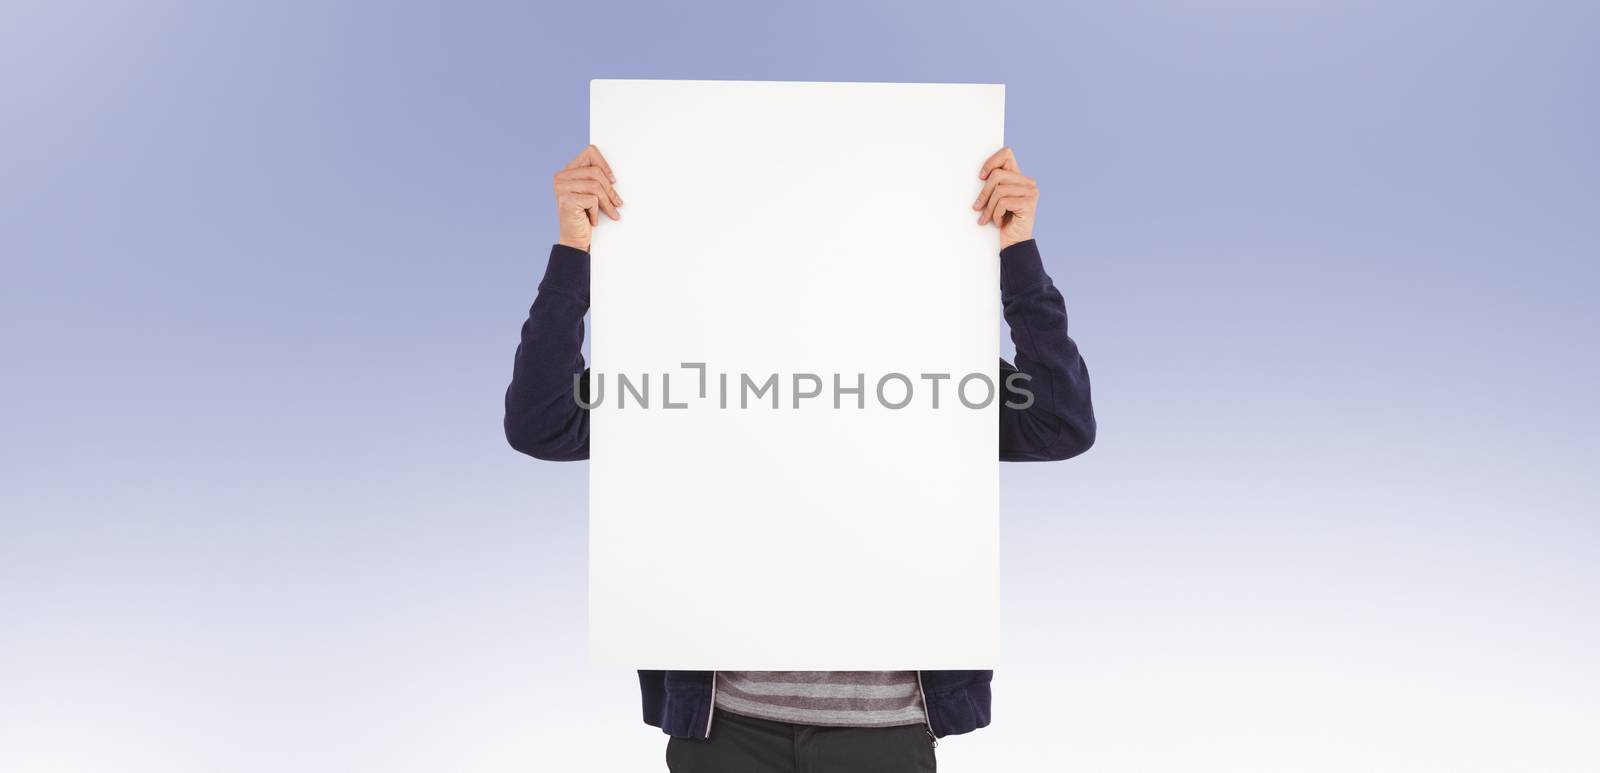 Man showing billboard in front of face against purple